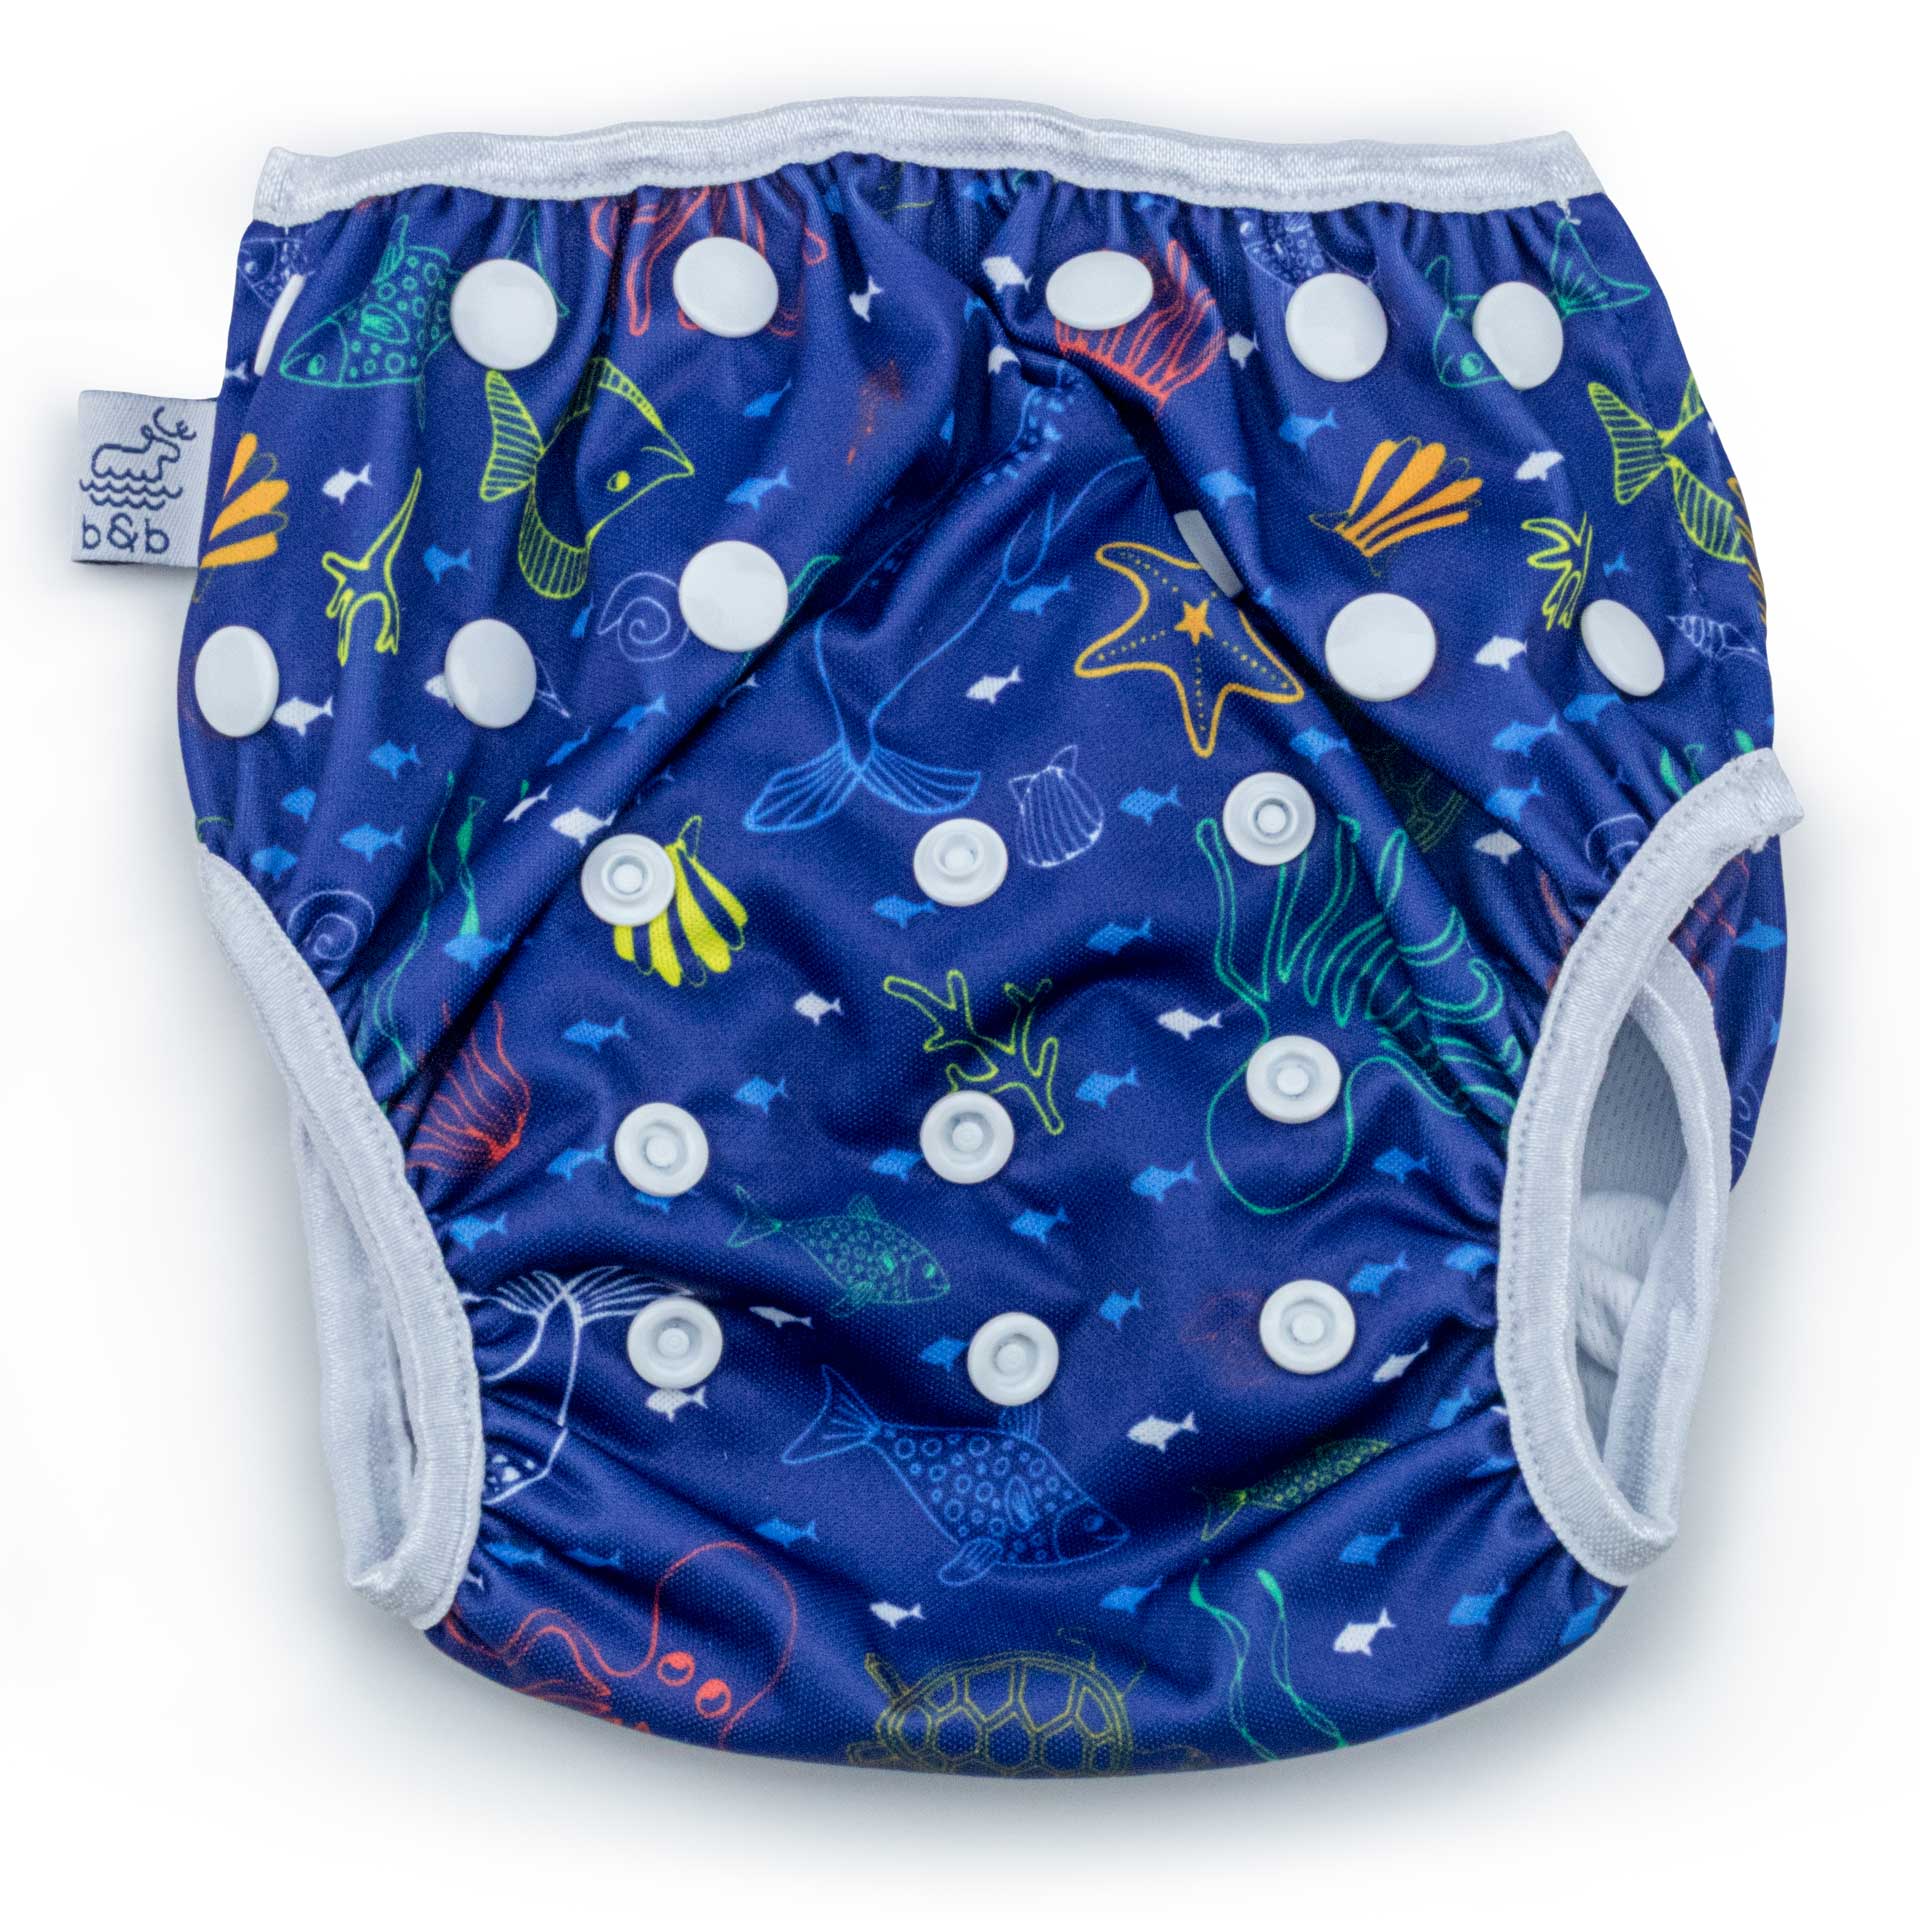 Beau and Belle Littles Swim Diaper, Regular Size, dark blue with outlines of sea creatures, Sea Friends print, flat lay, front view